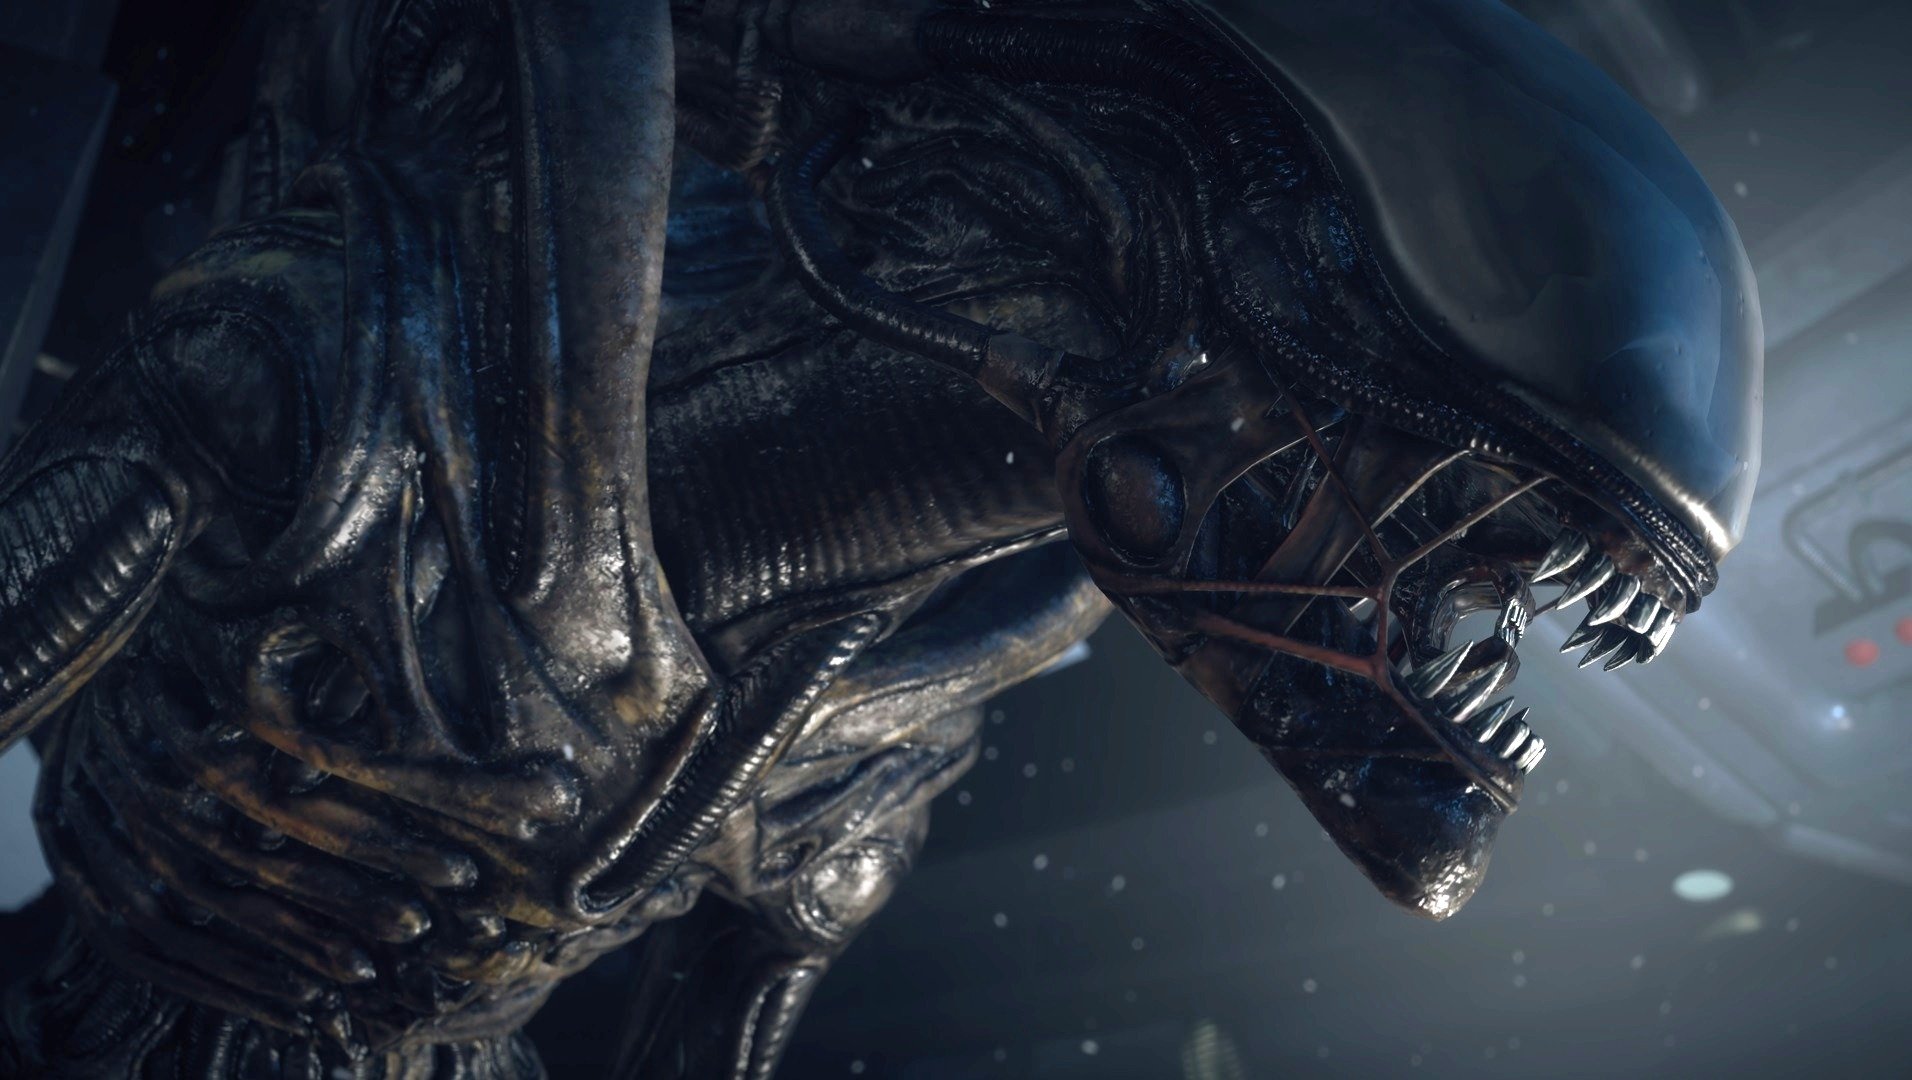 Alien: Isolation is on sale for $2—that’s 95% off